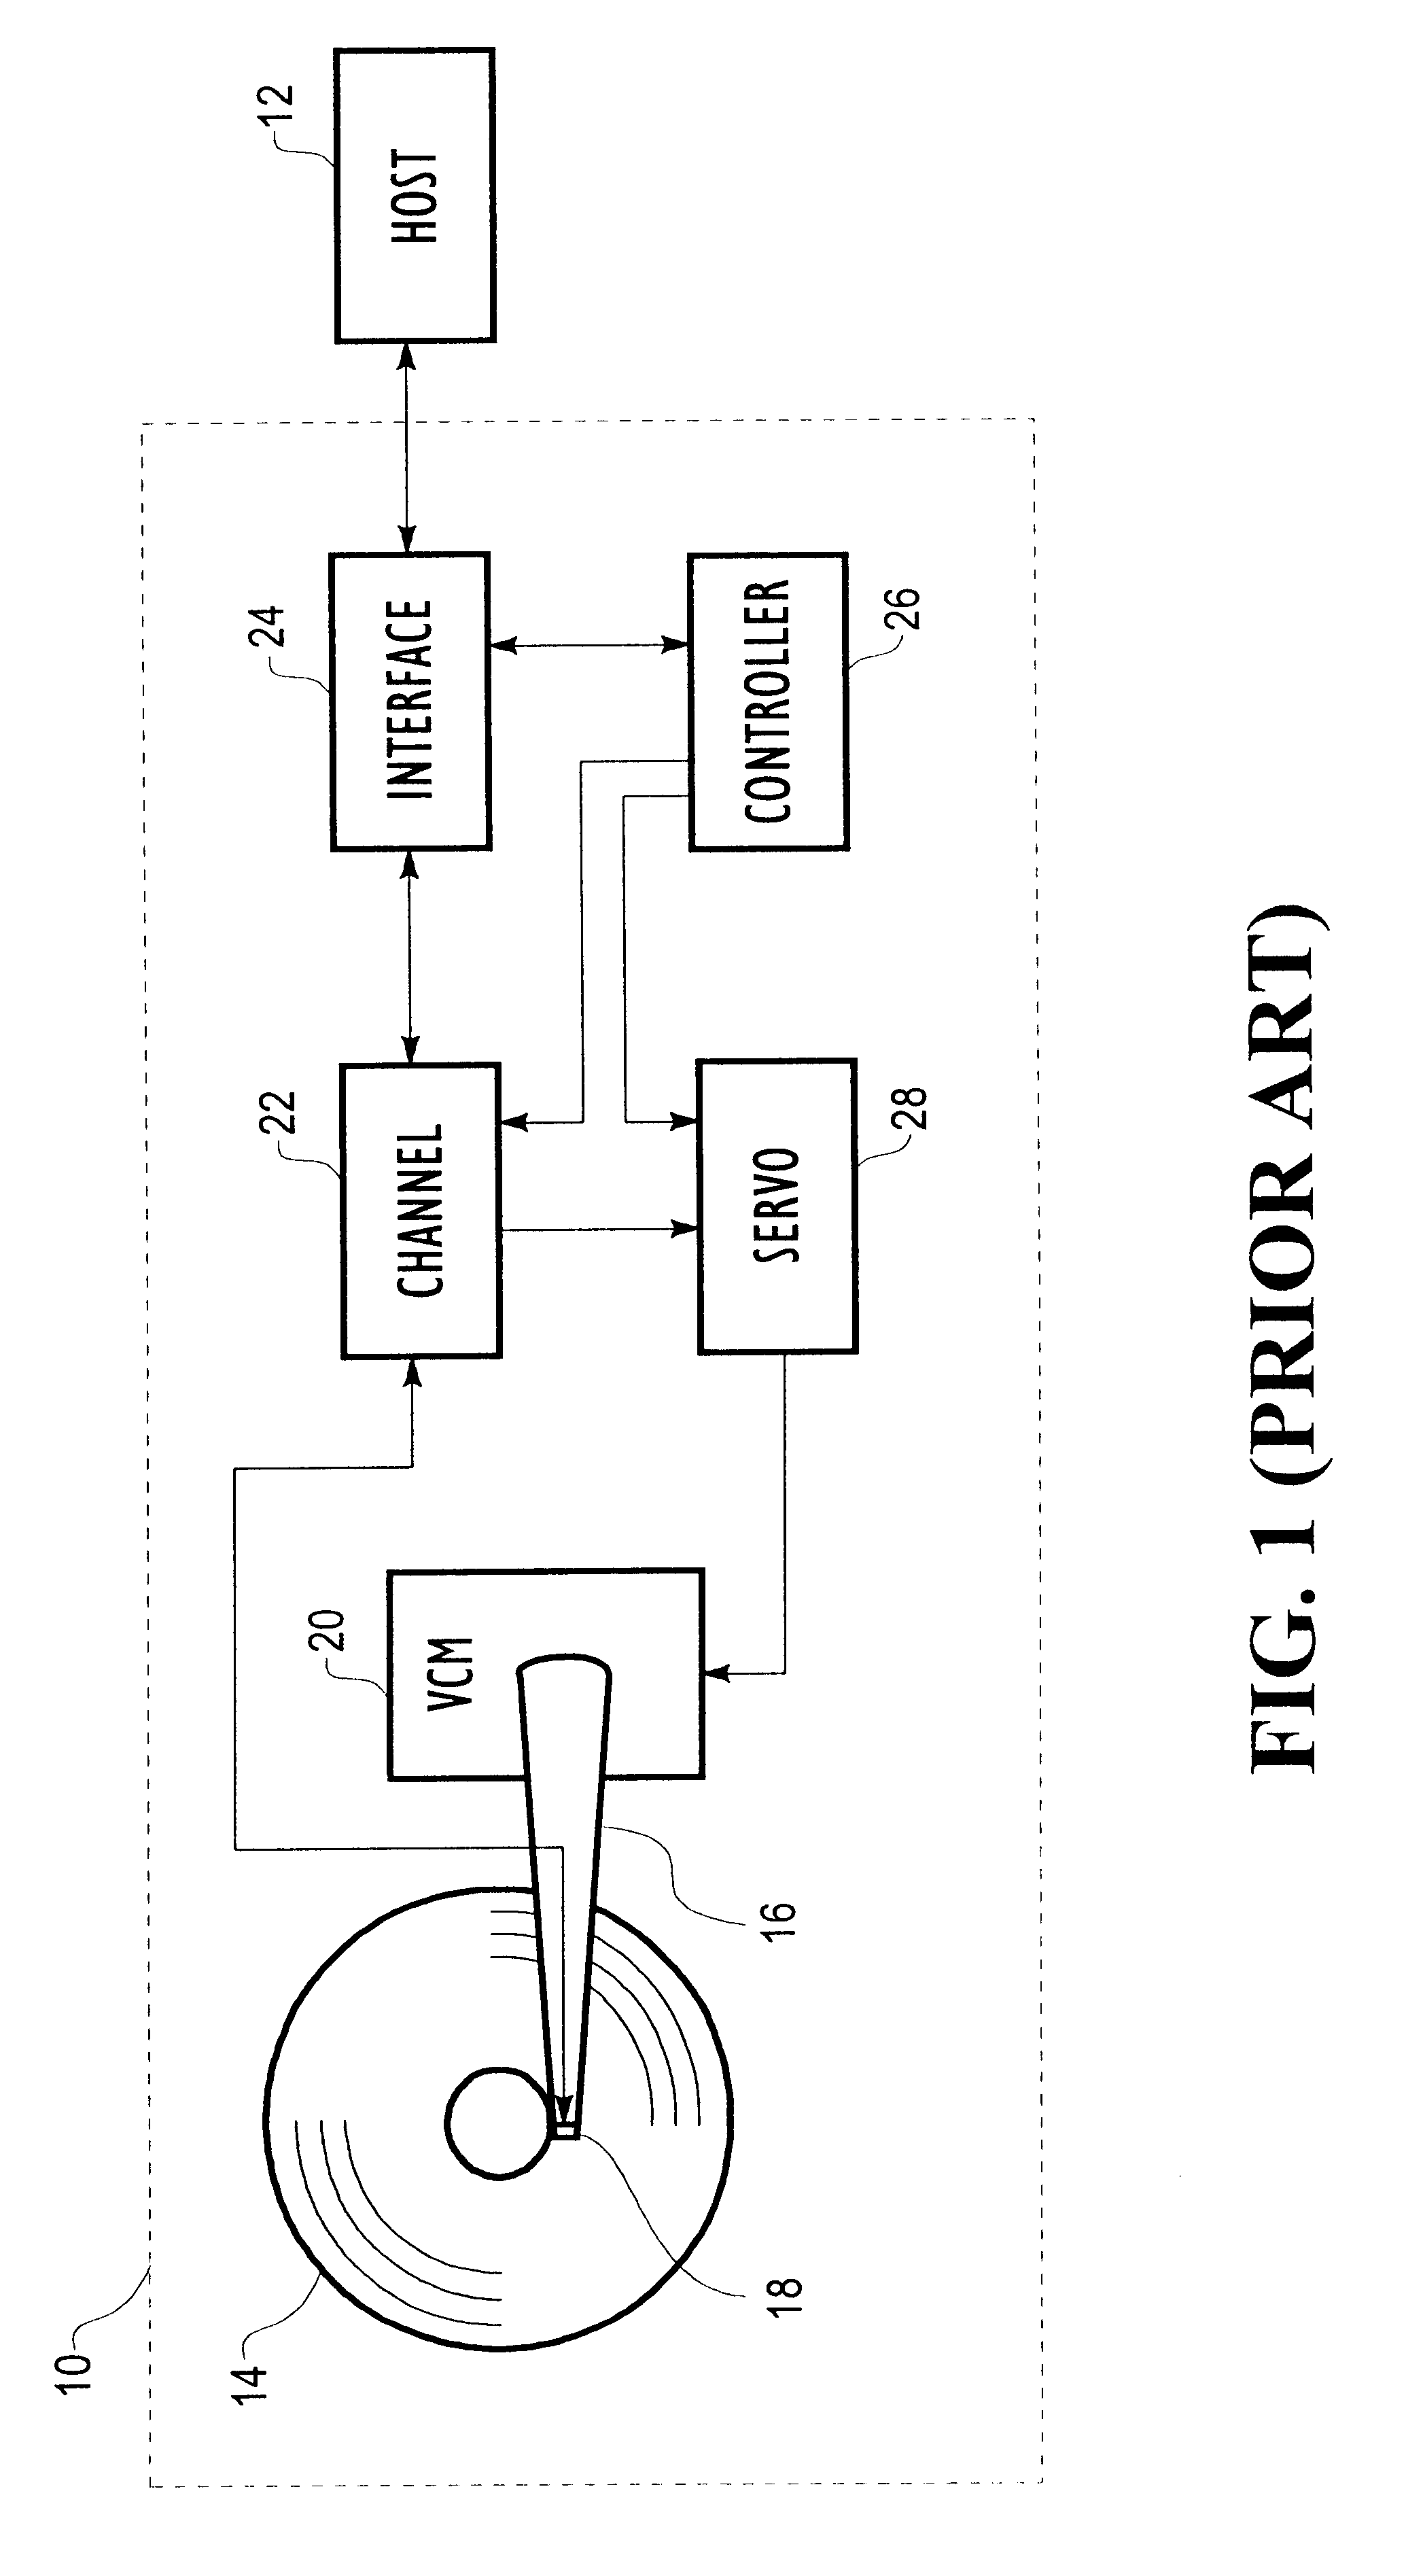 Disk drive which detects head flying height using first and second non-overlapping data patterns with different frequencies